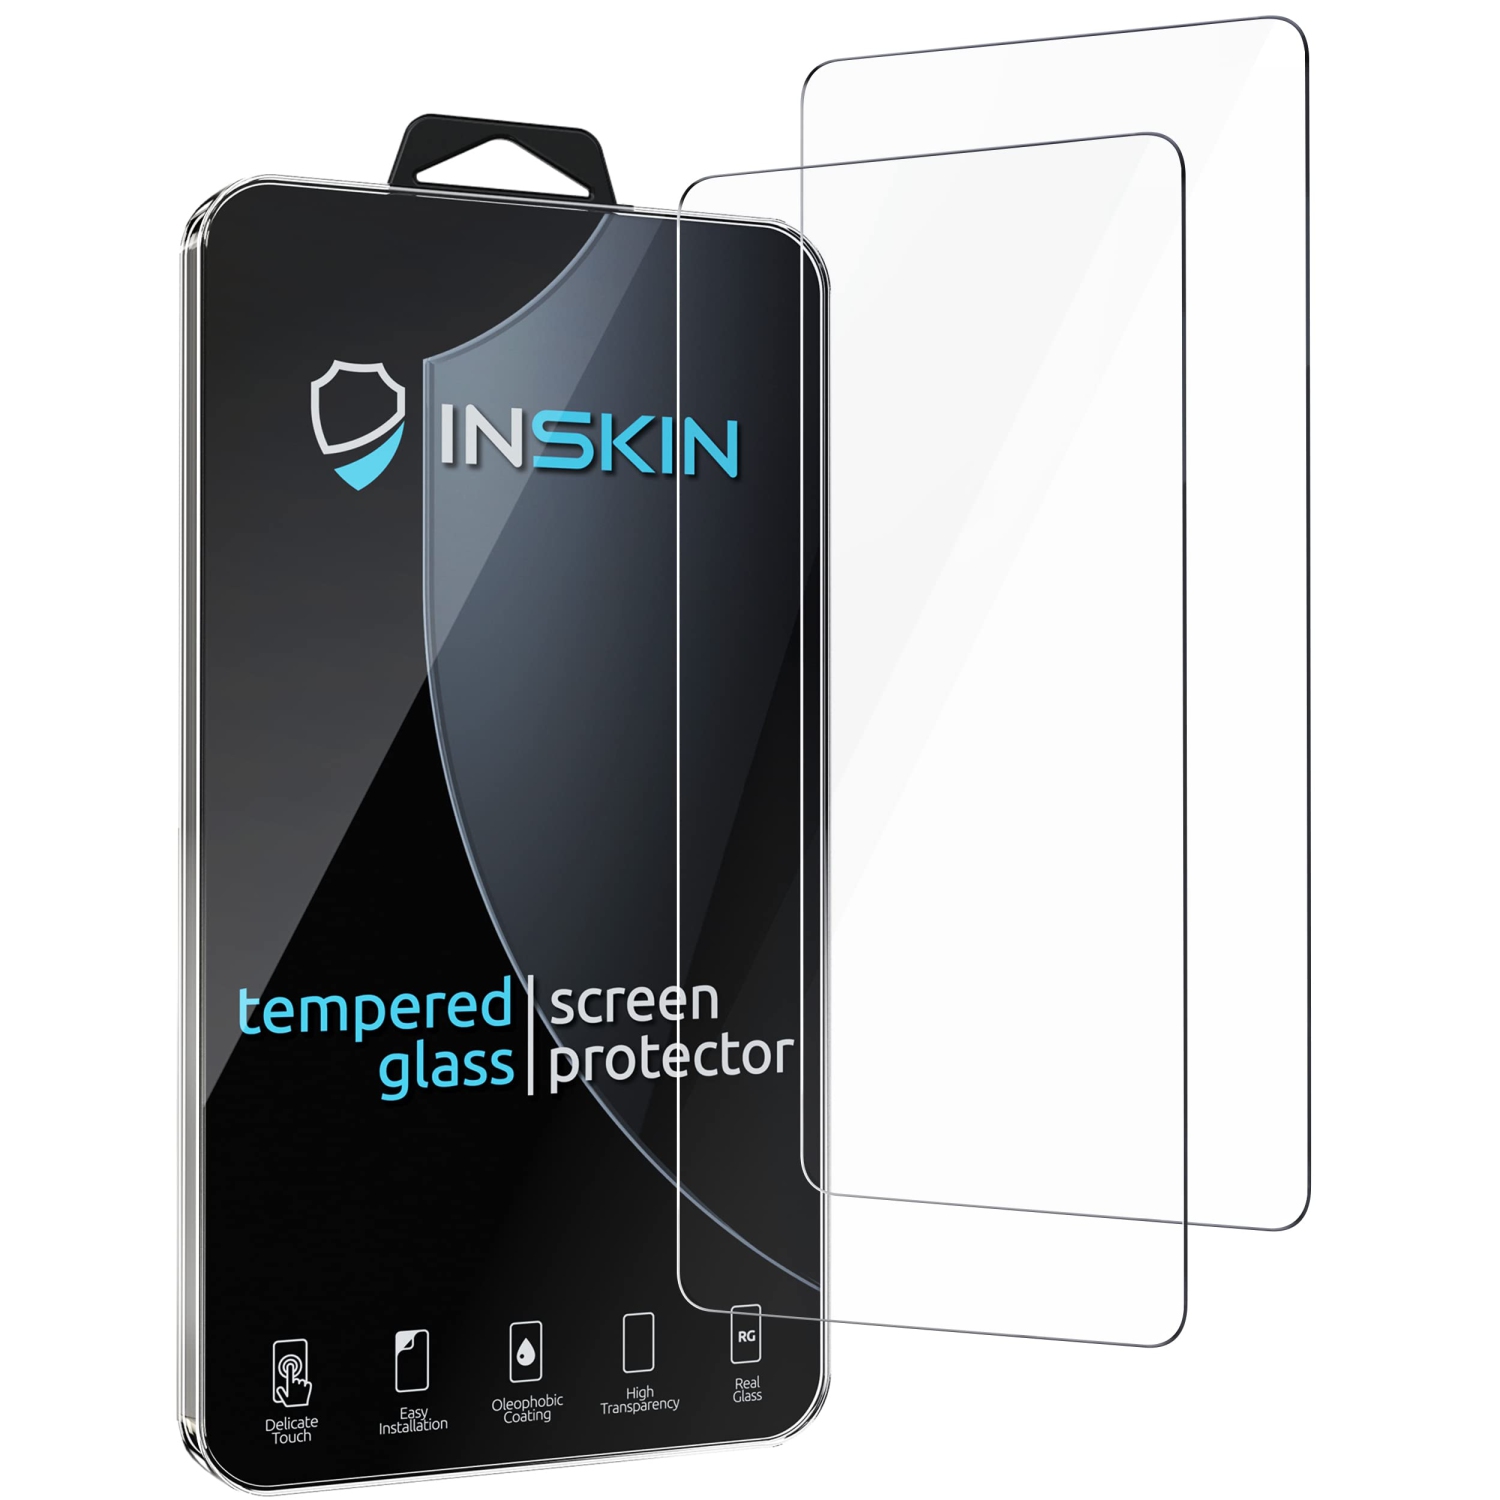 Inskin Case-Friendly Tempered Glass Screen Protector, fits Samsung Galaxy A71 5G 6.7 inch SM-A716 . 2-Pack.